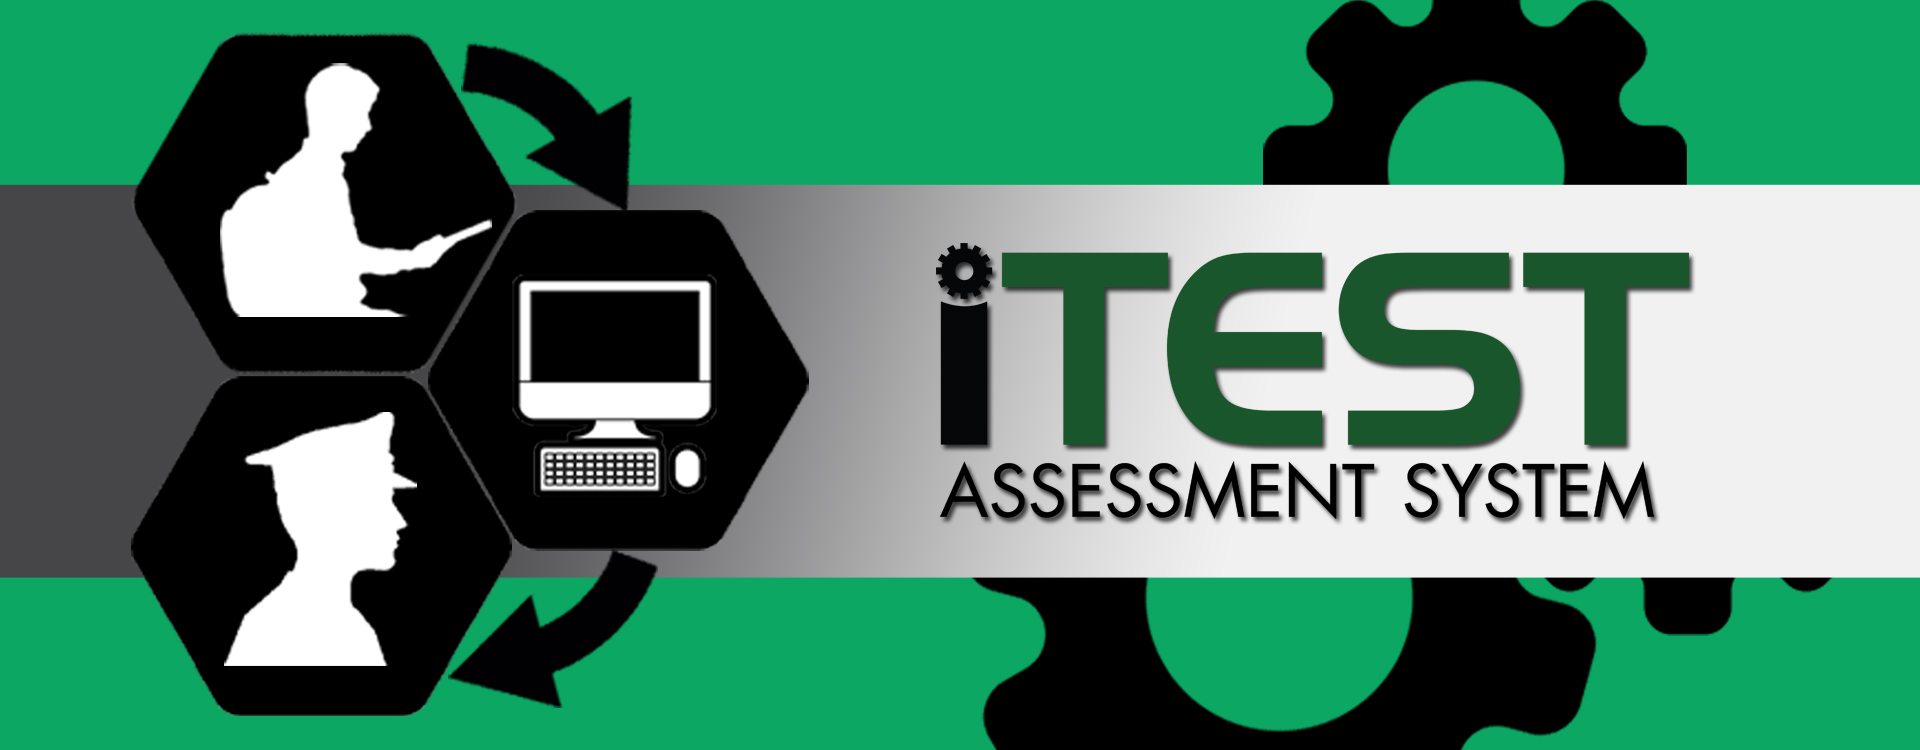 Jebsen Competency Development chooses iTEST for their Assessment System